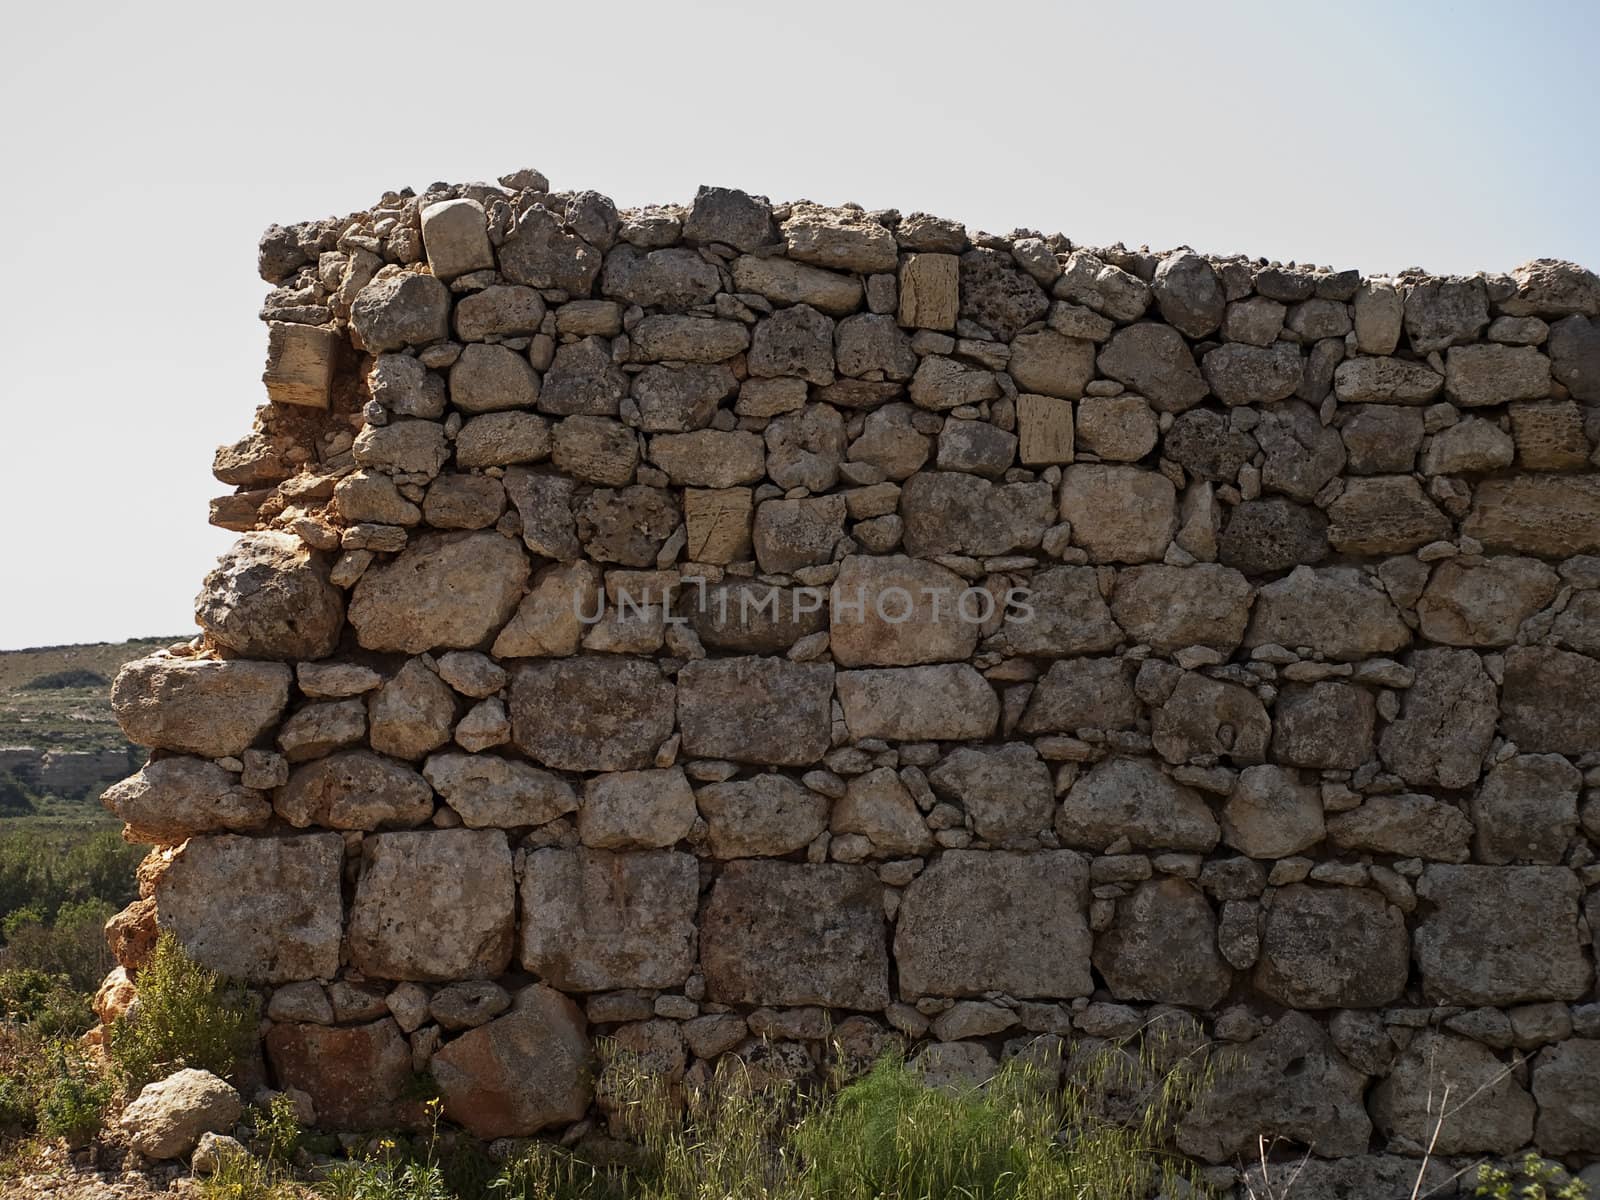 An old and neglected historic Roman wall on the island of Malta